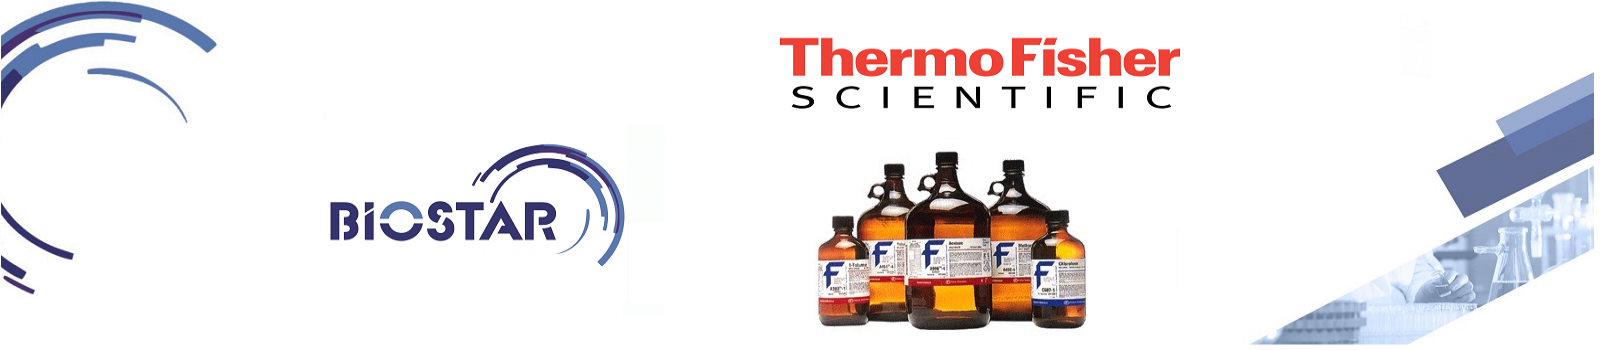 Thermo Fisher Scientific Chemical